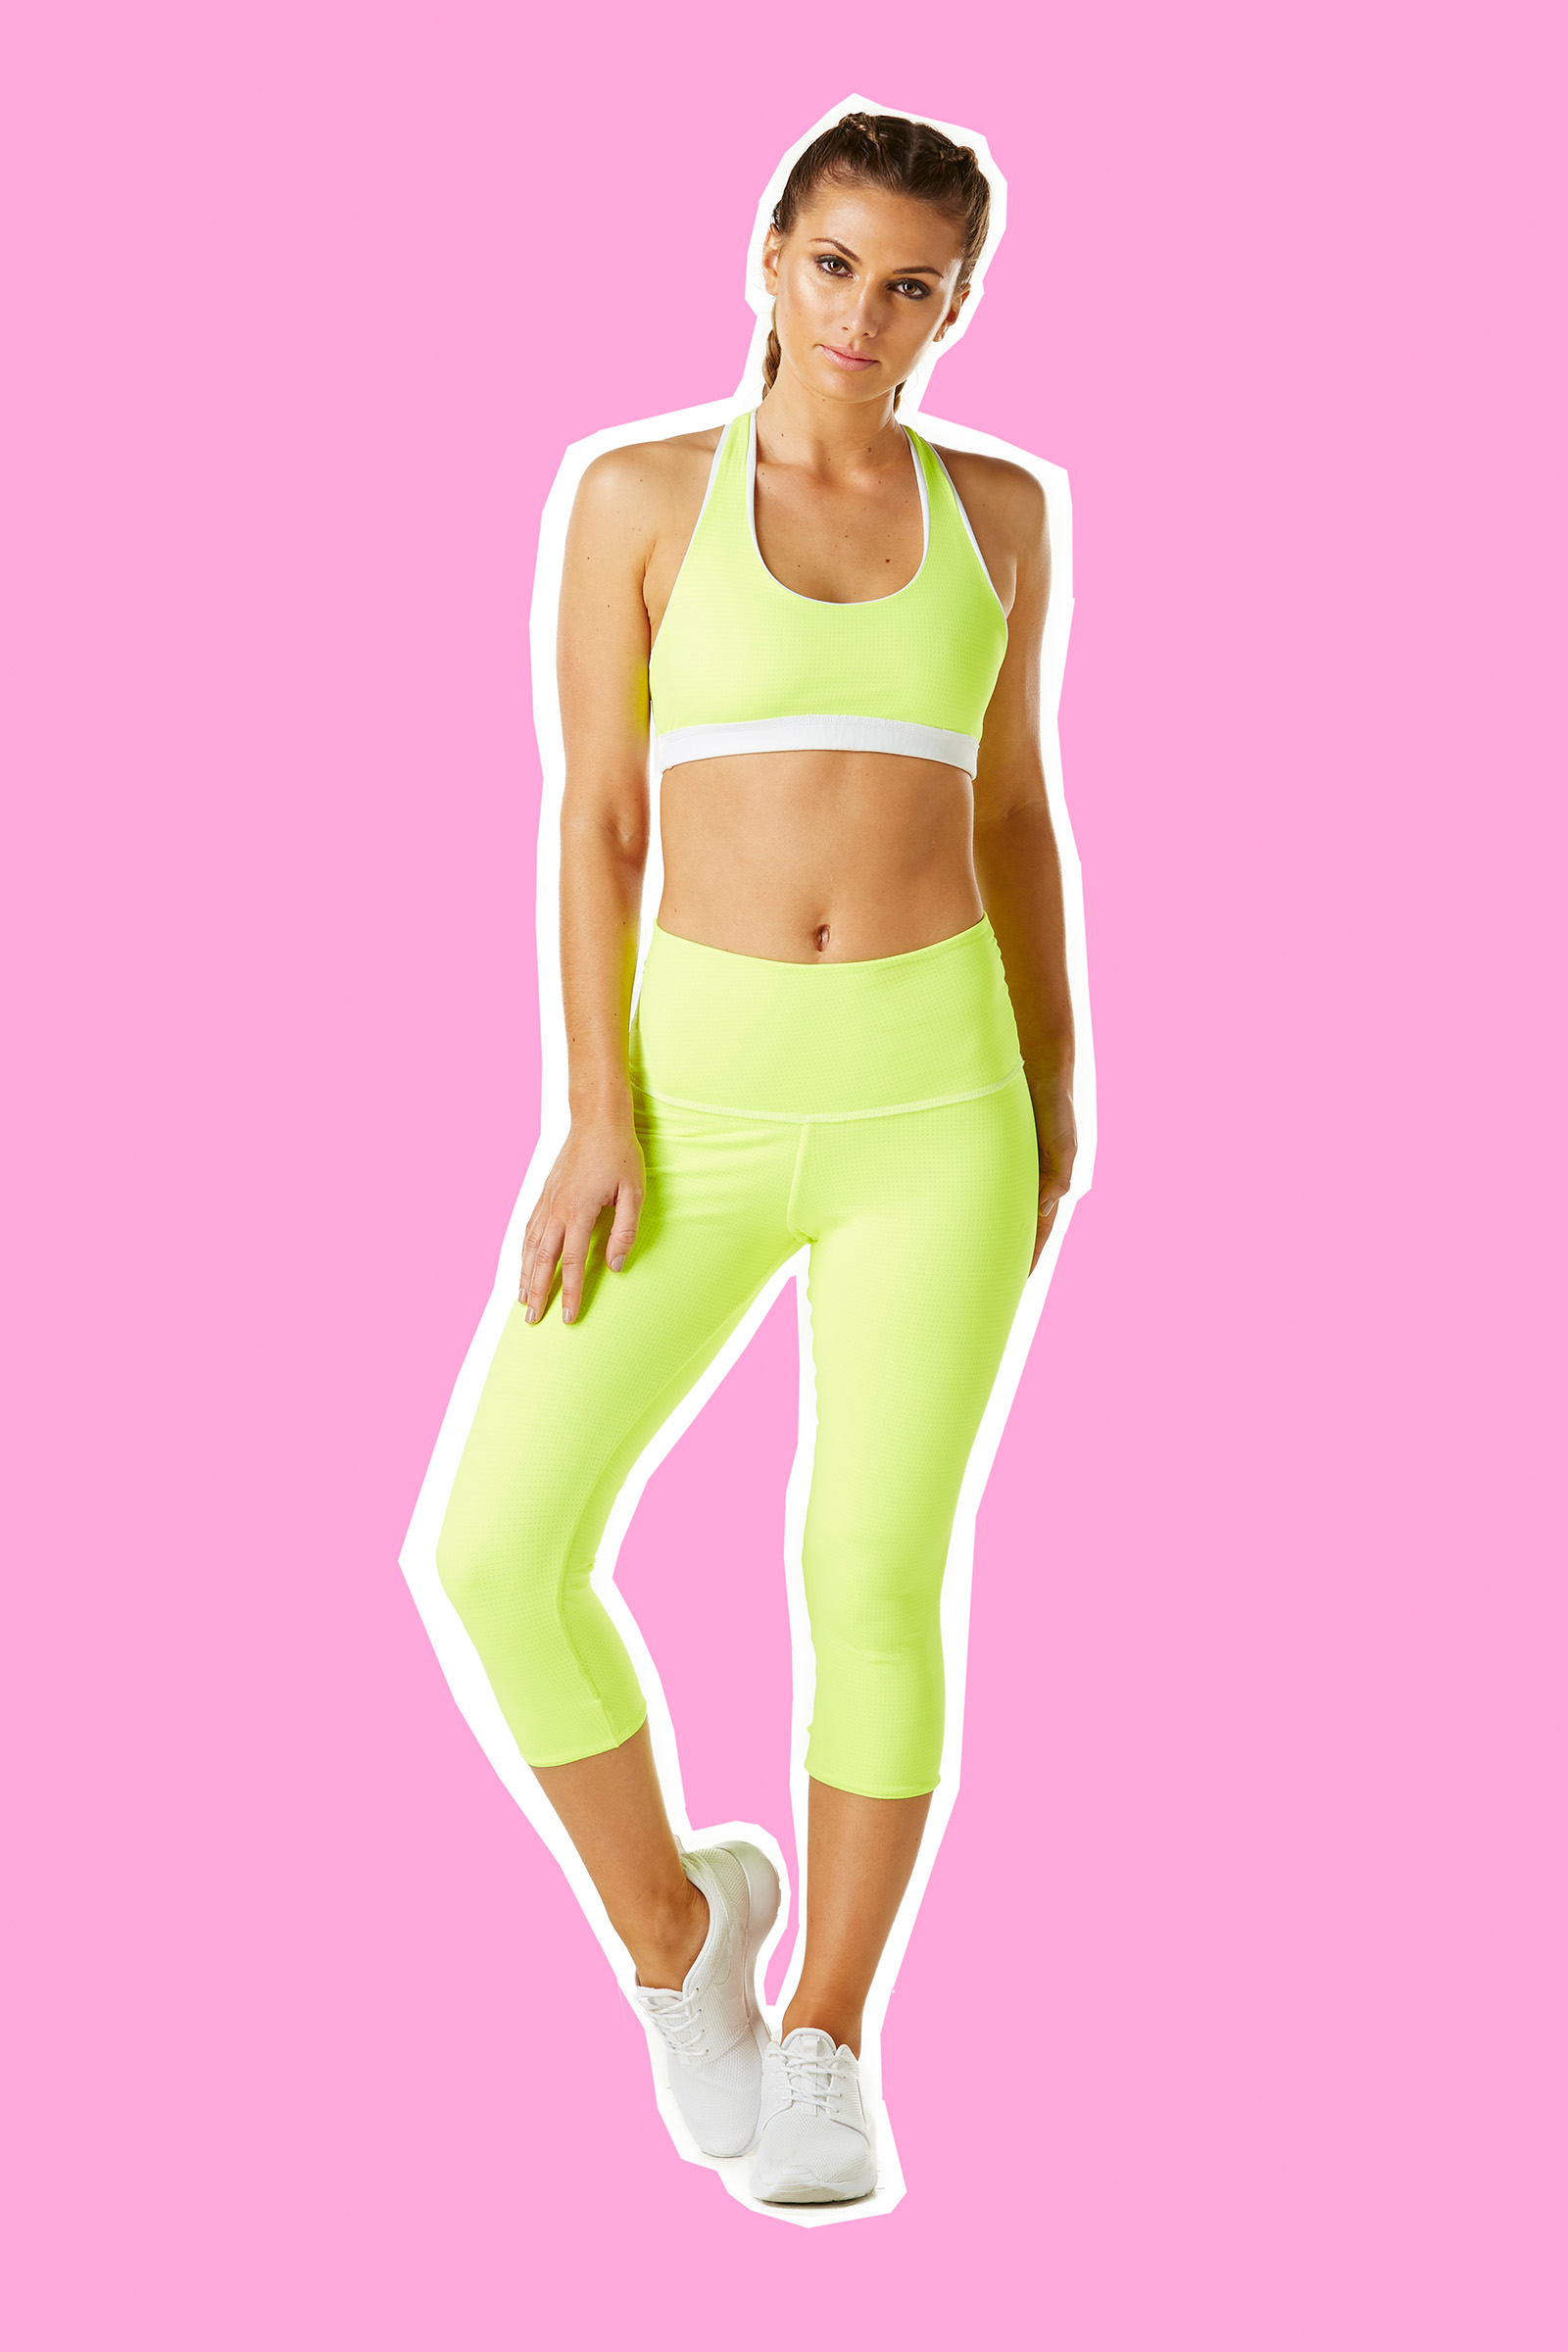 Studio fashion photography of female model wearing yellow activewear on pink background